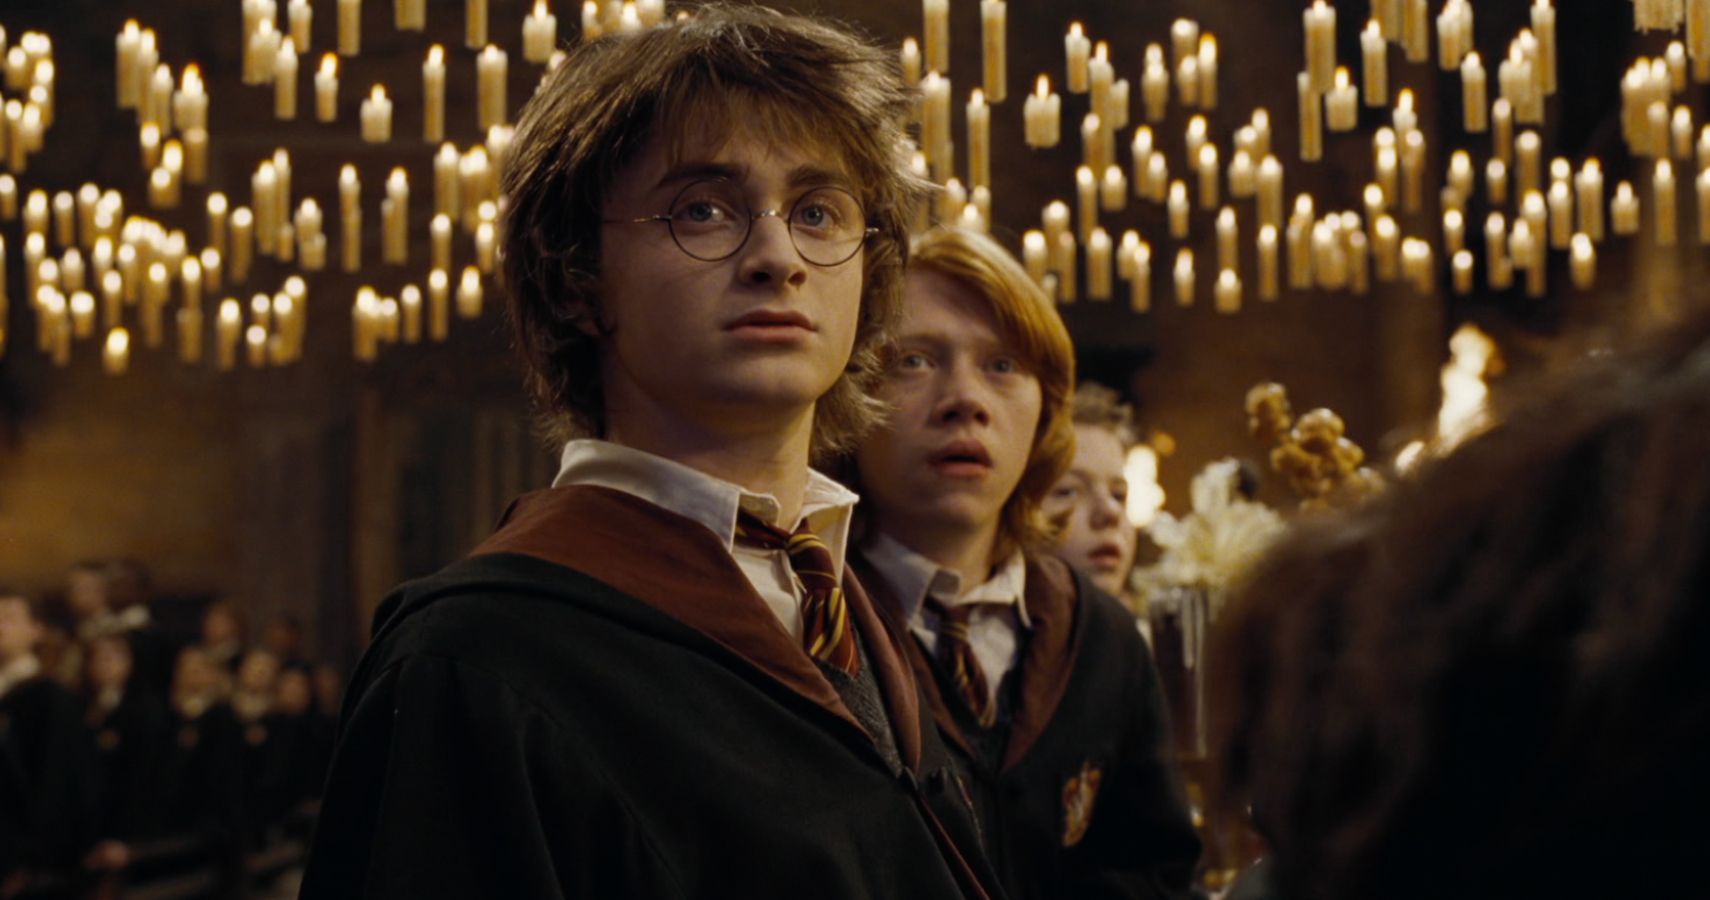 5 Harry Potter Heroes Fans Hated (& 5 Villains They Loved)